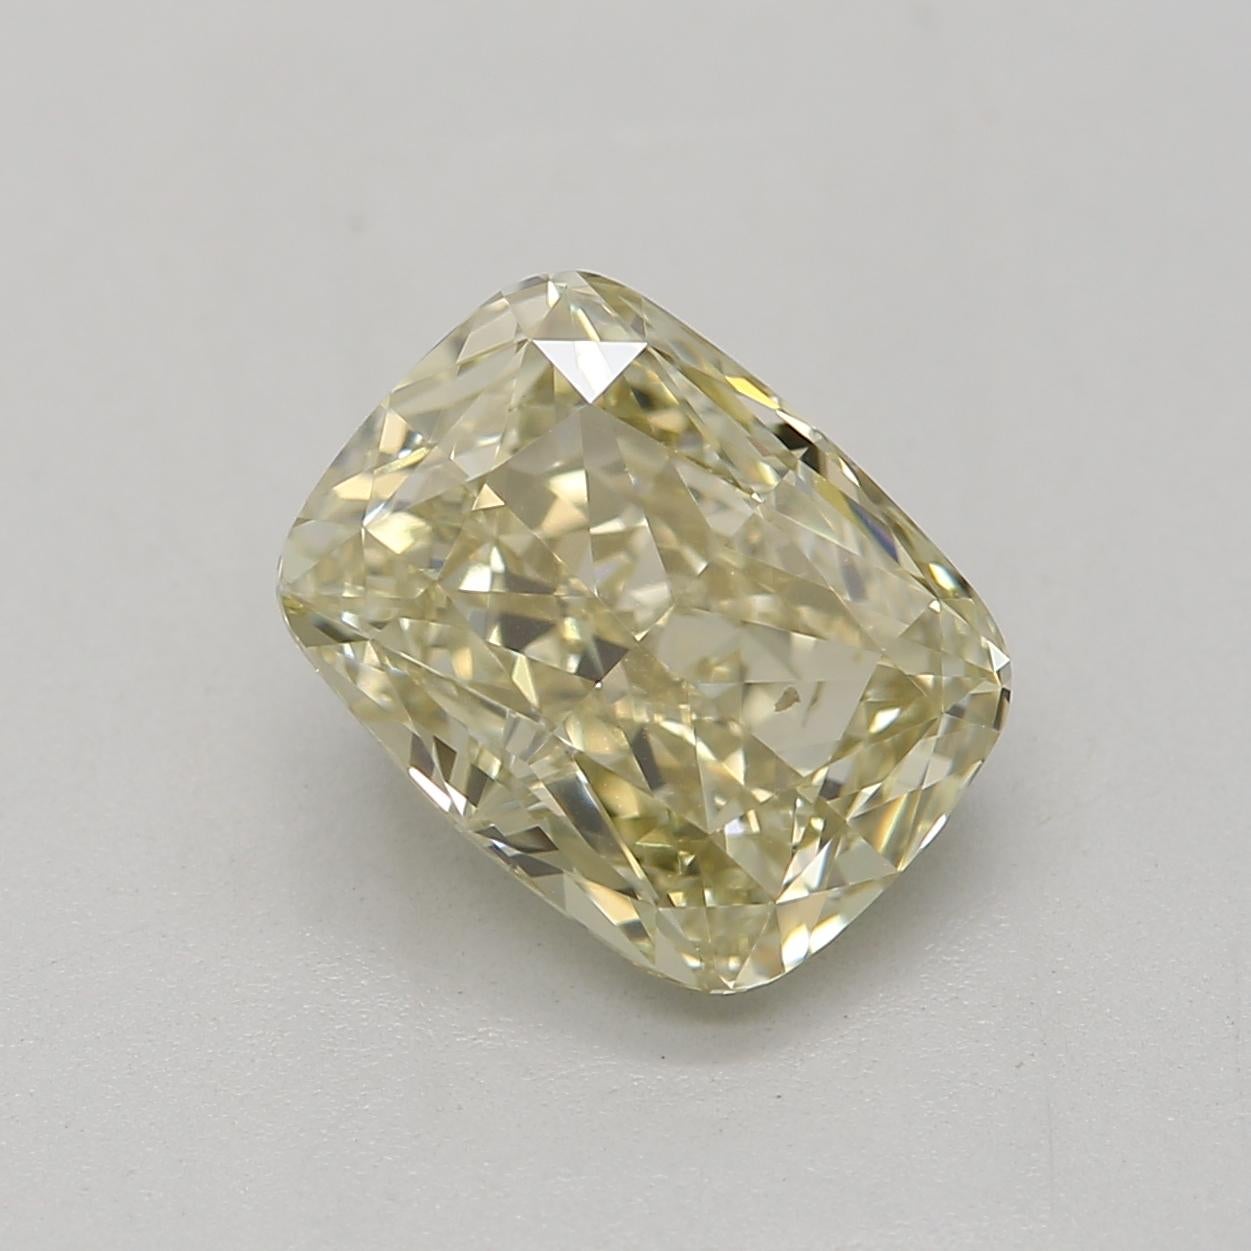 ***100% NATURAL FANCY COLOUR DIAMOND***

✪ Diamond Details ✪

➛ Shape: Cushion
➛ Colour Grade: Fancy Brownish Greenish Yellow
➛ Carat: 1.32
➛ Clarity: VS2
➛ GIA Certified 

^FEATURES OF THE DIAMOND^

Our cushion cut diamond is a square or